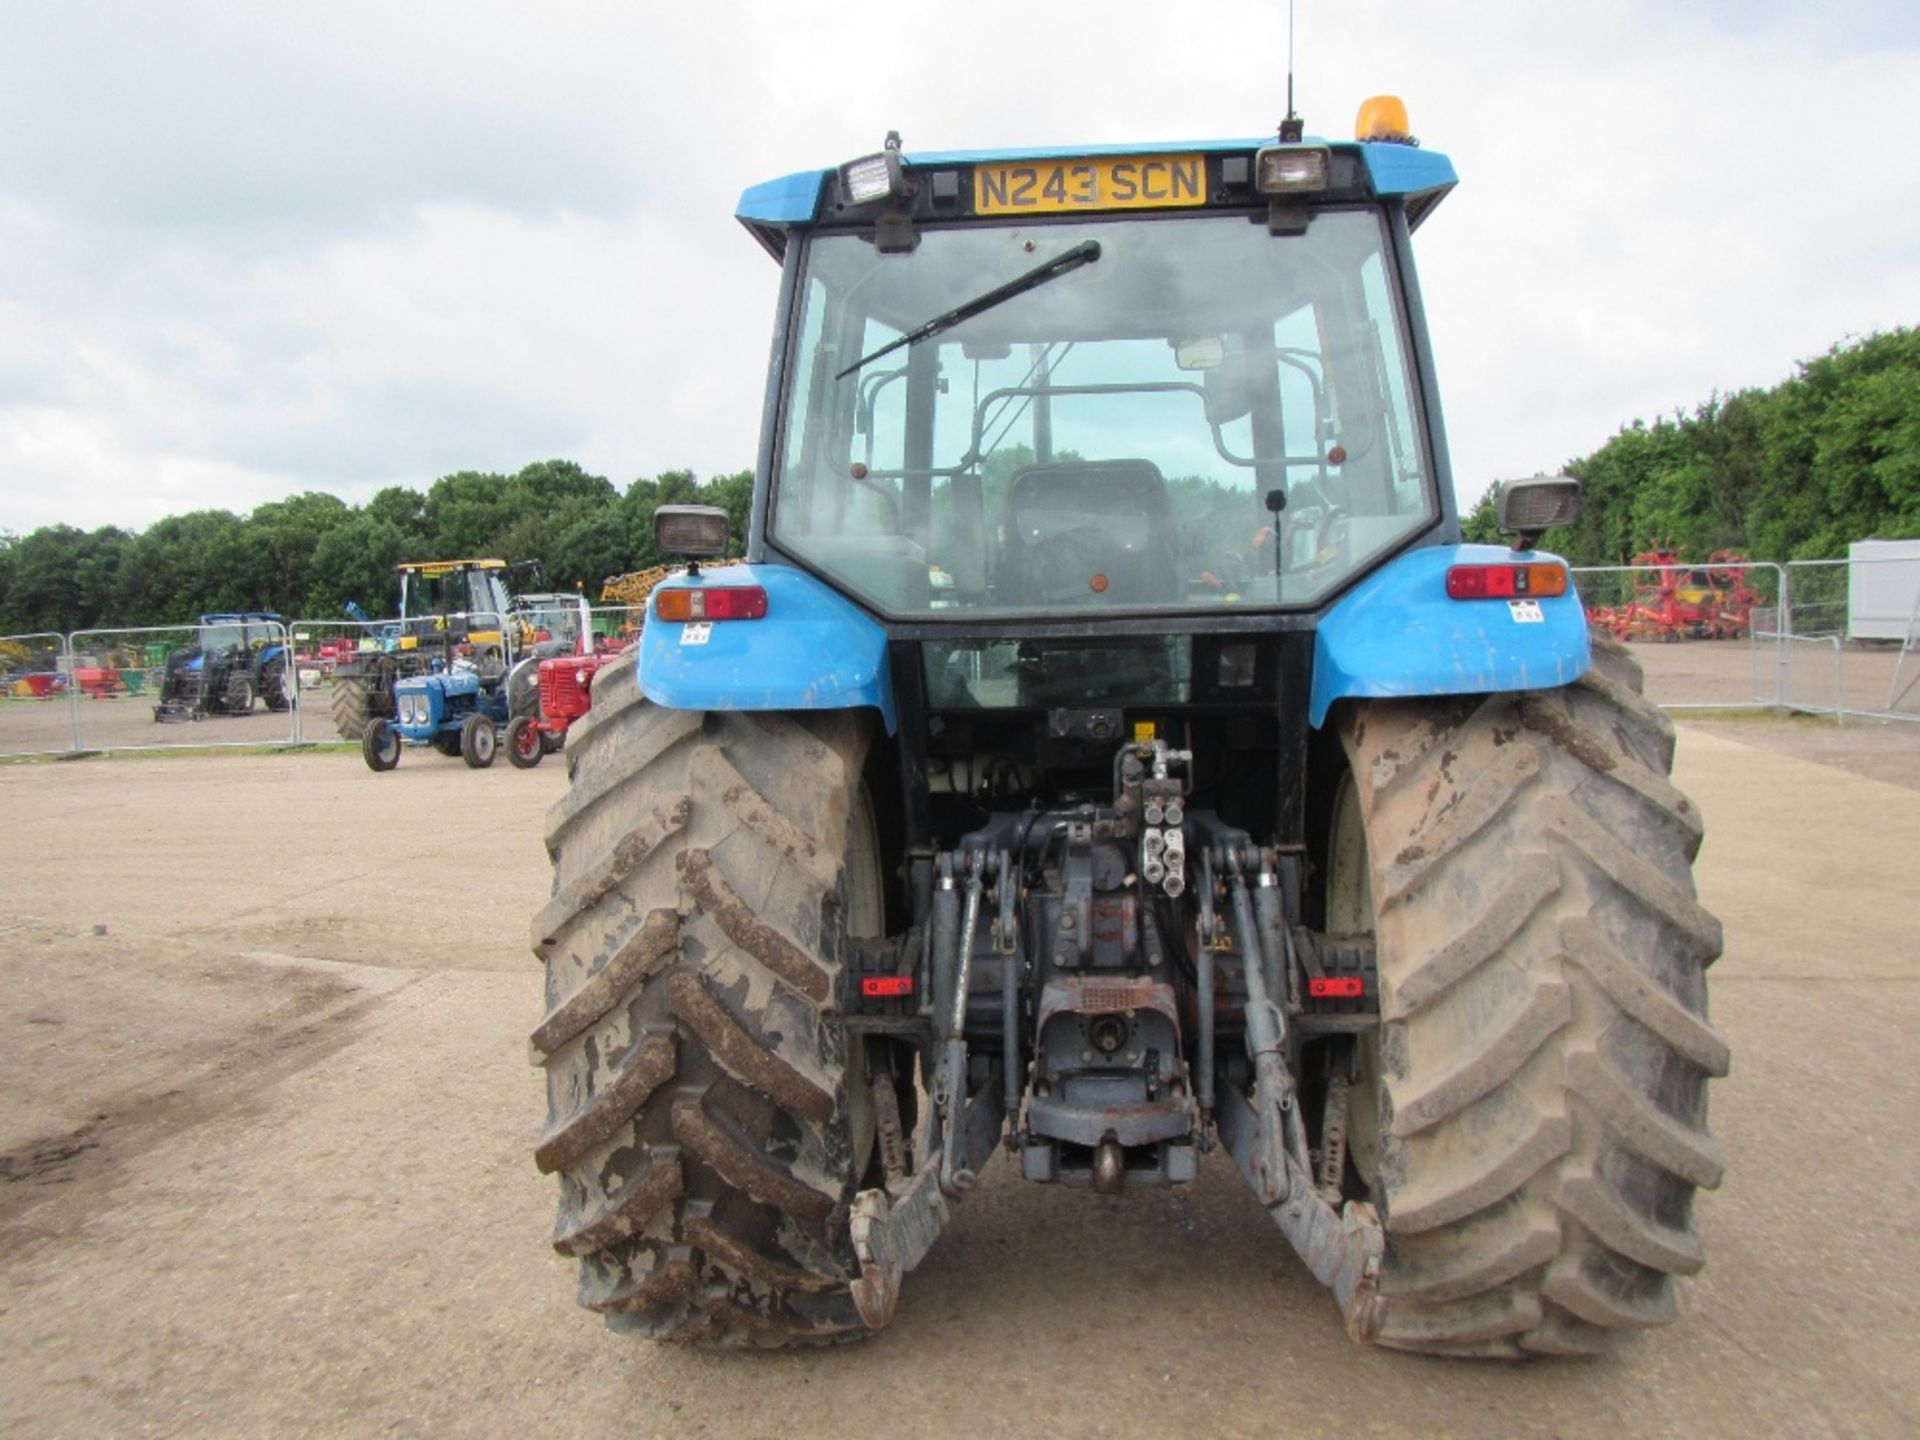 New Holland 8340 SLE 4wd Tractor. V5 will be supplied Reg. No. N243 SCN Ser. No. 025324B - Image 6 of 17